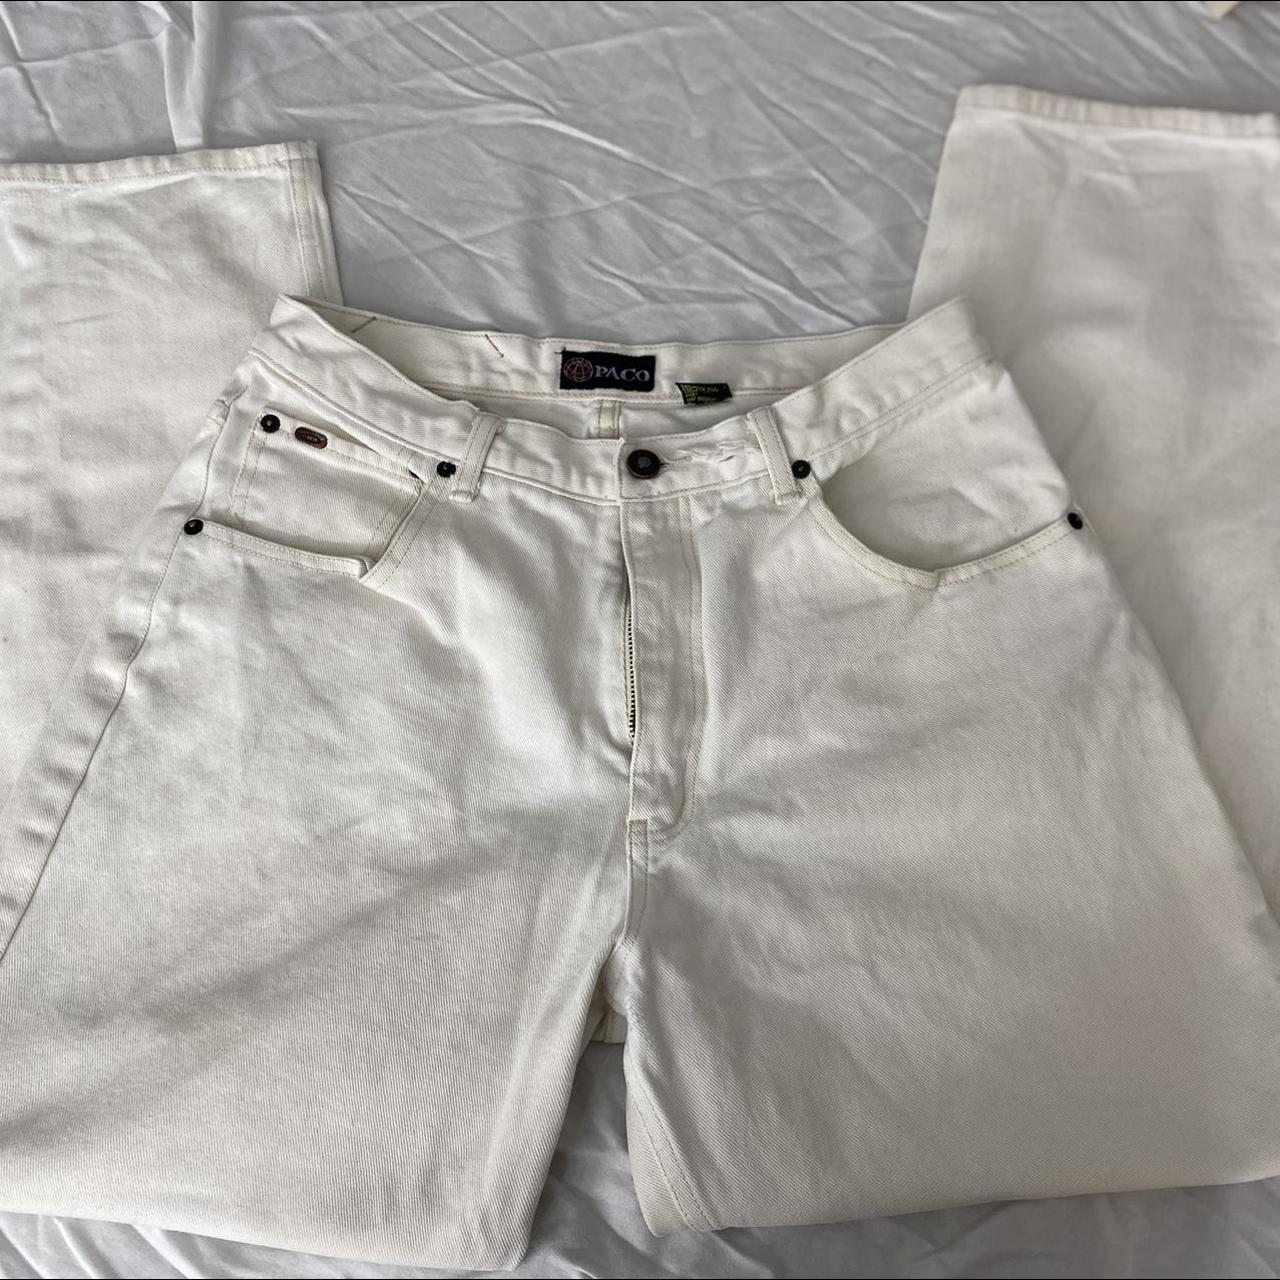 Paco Men's Cream and White Jeans | Depop